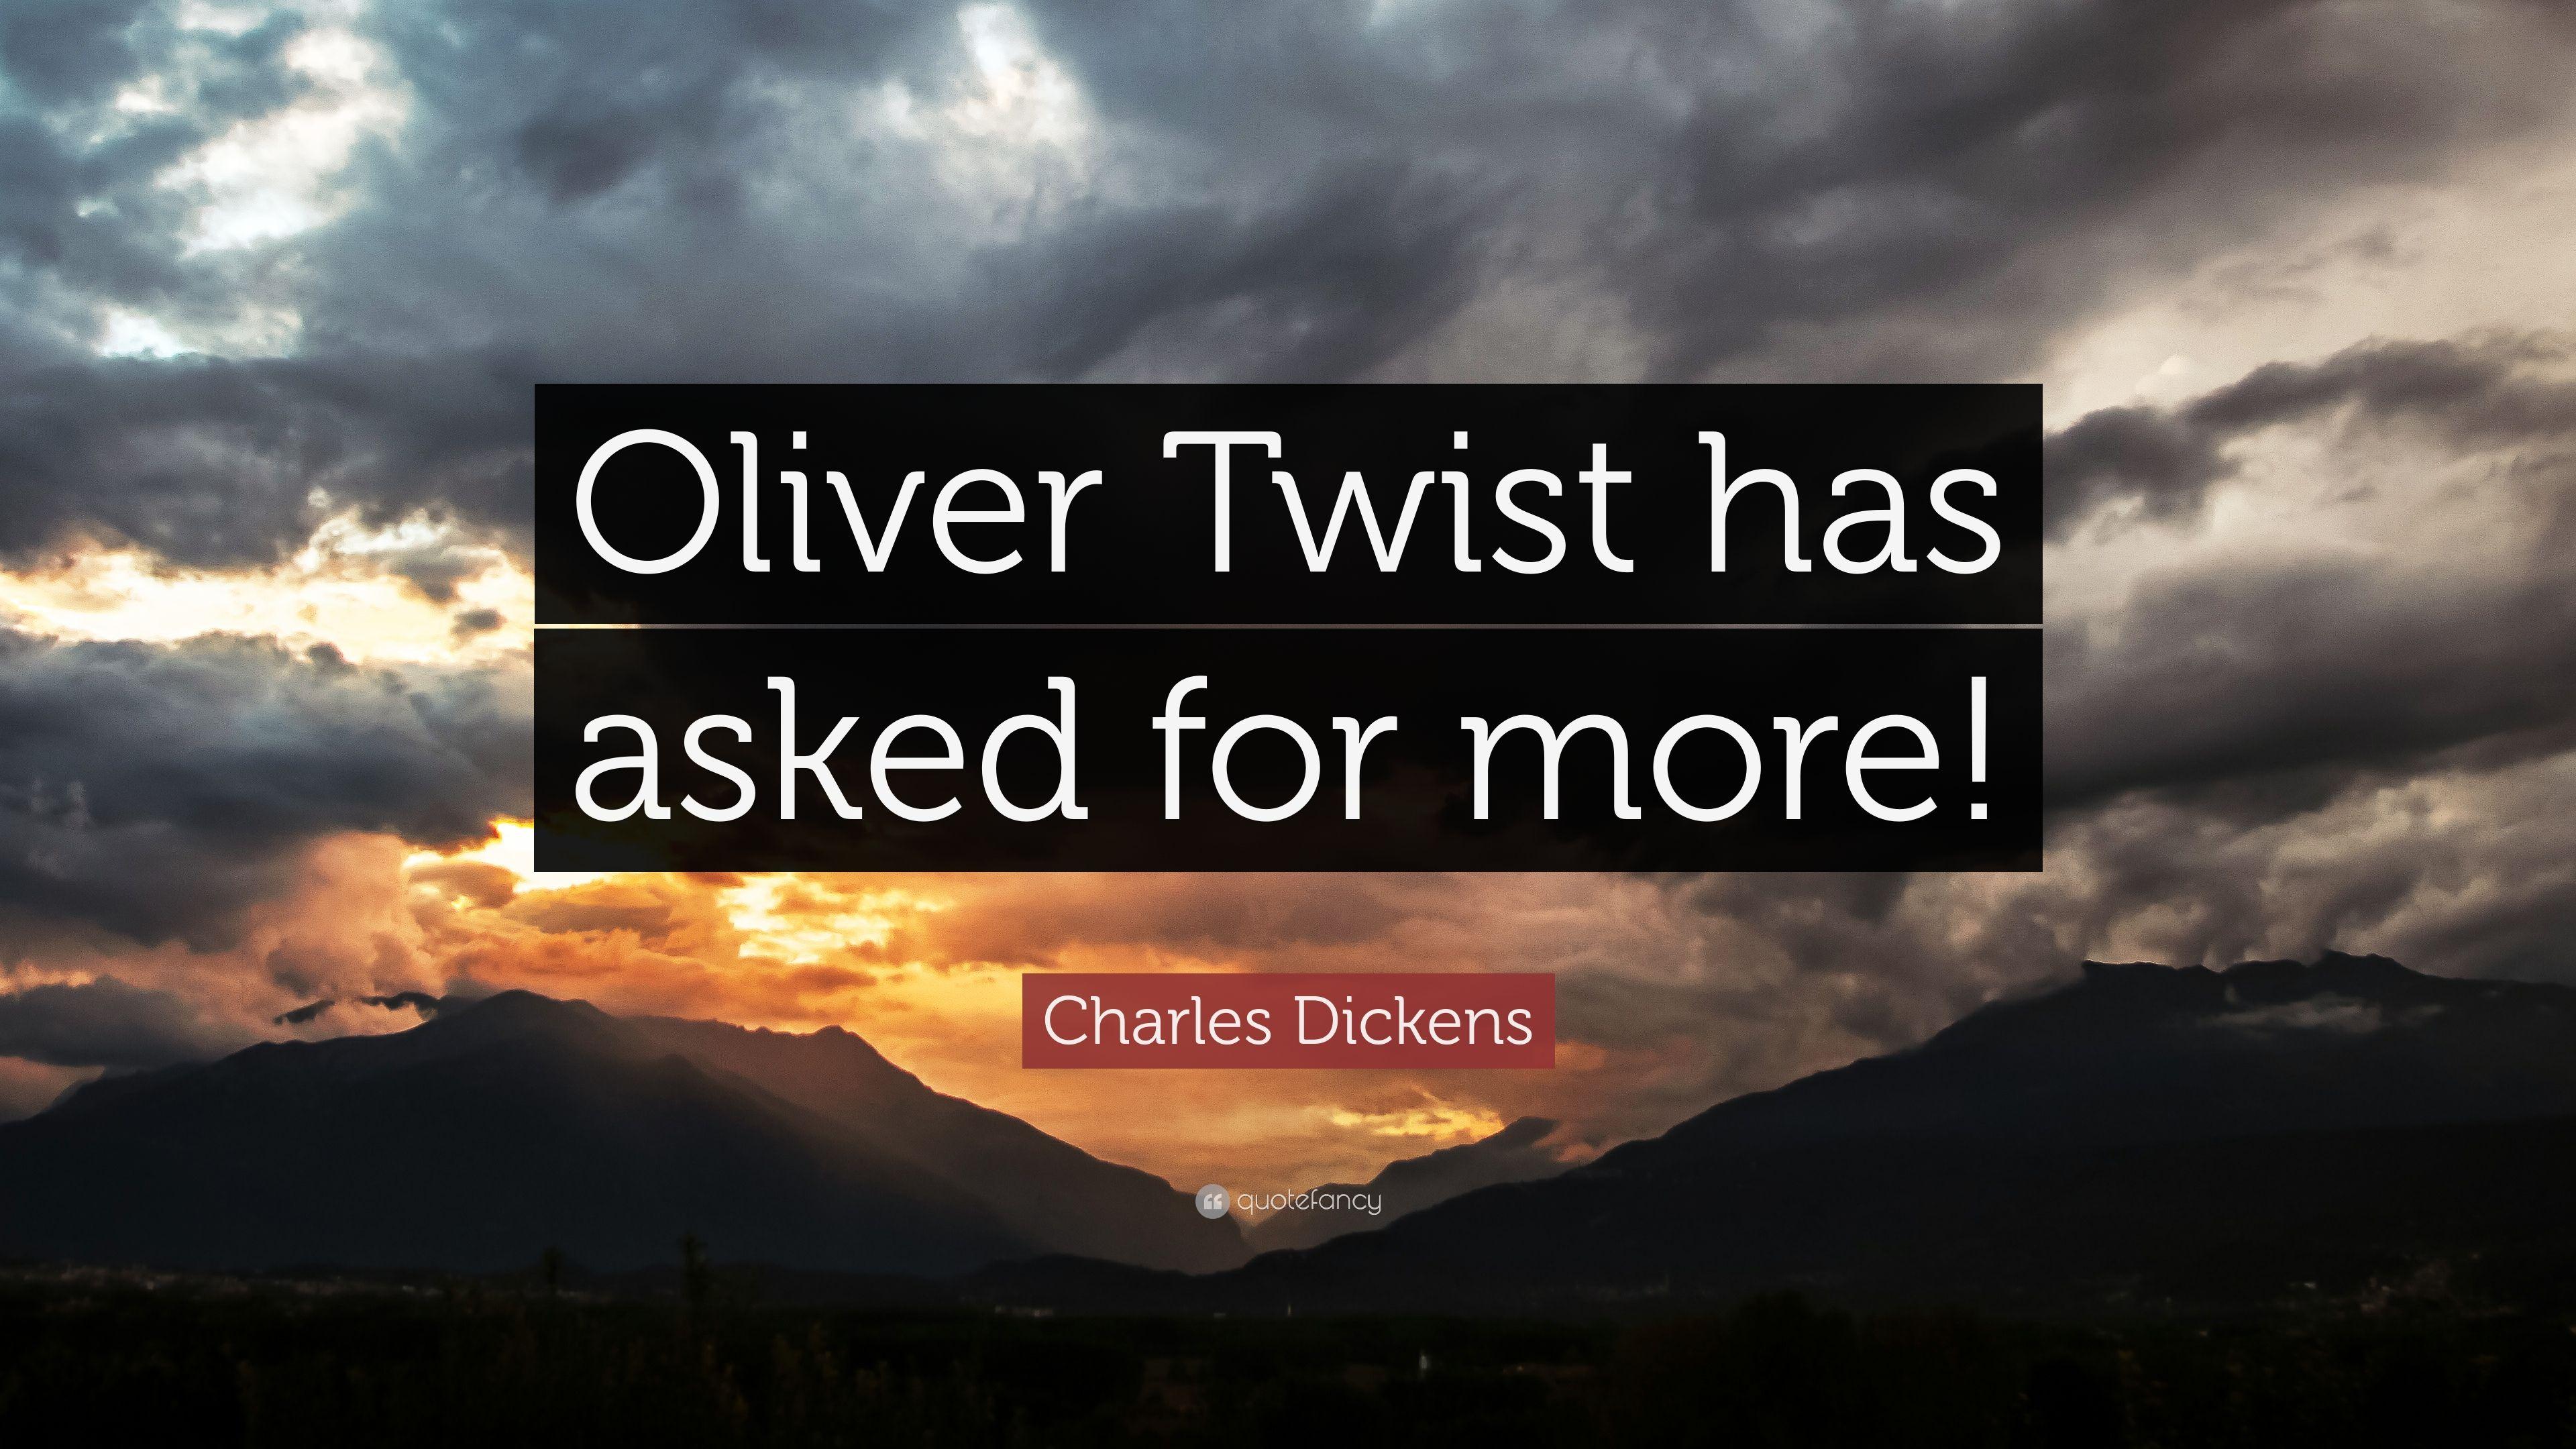 Charles Dickens Quote: “Oliver Twist has asked for more!” 7